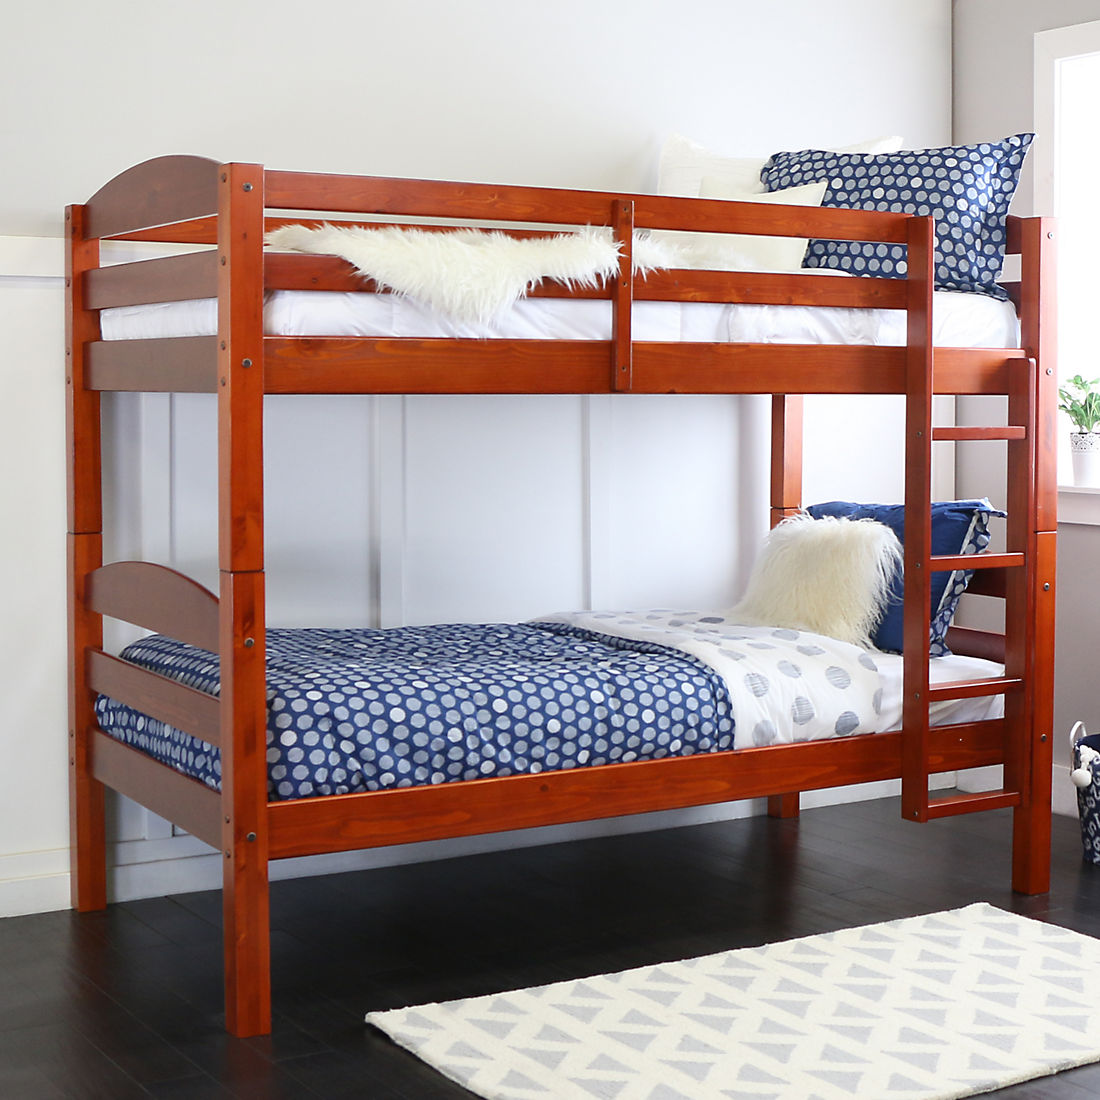 W Trends Twin Size Solid Wood Bunk Bed, Cherry Wood Twin Bunk Bed